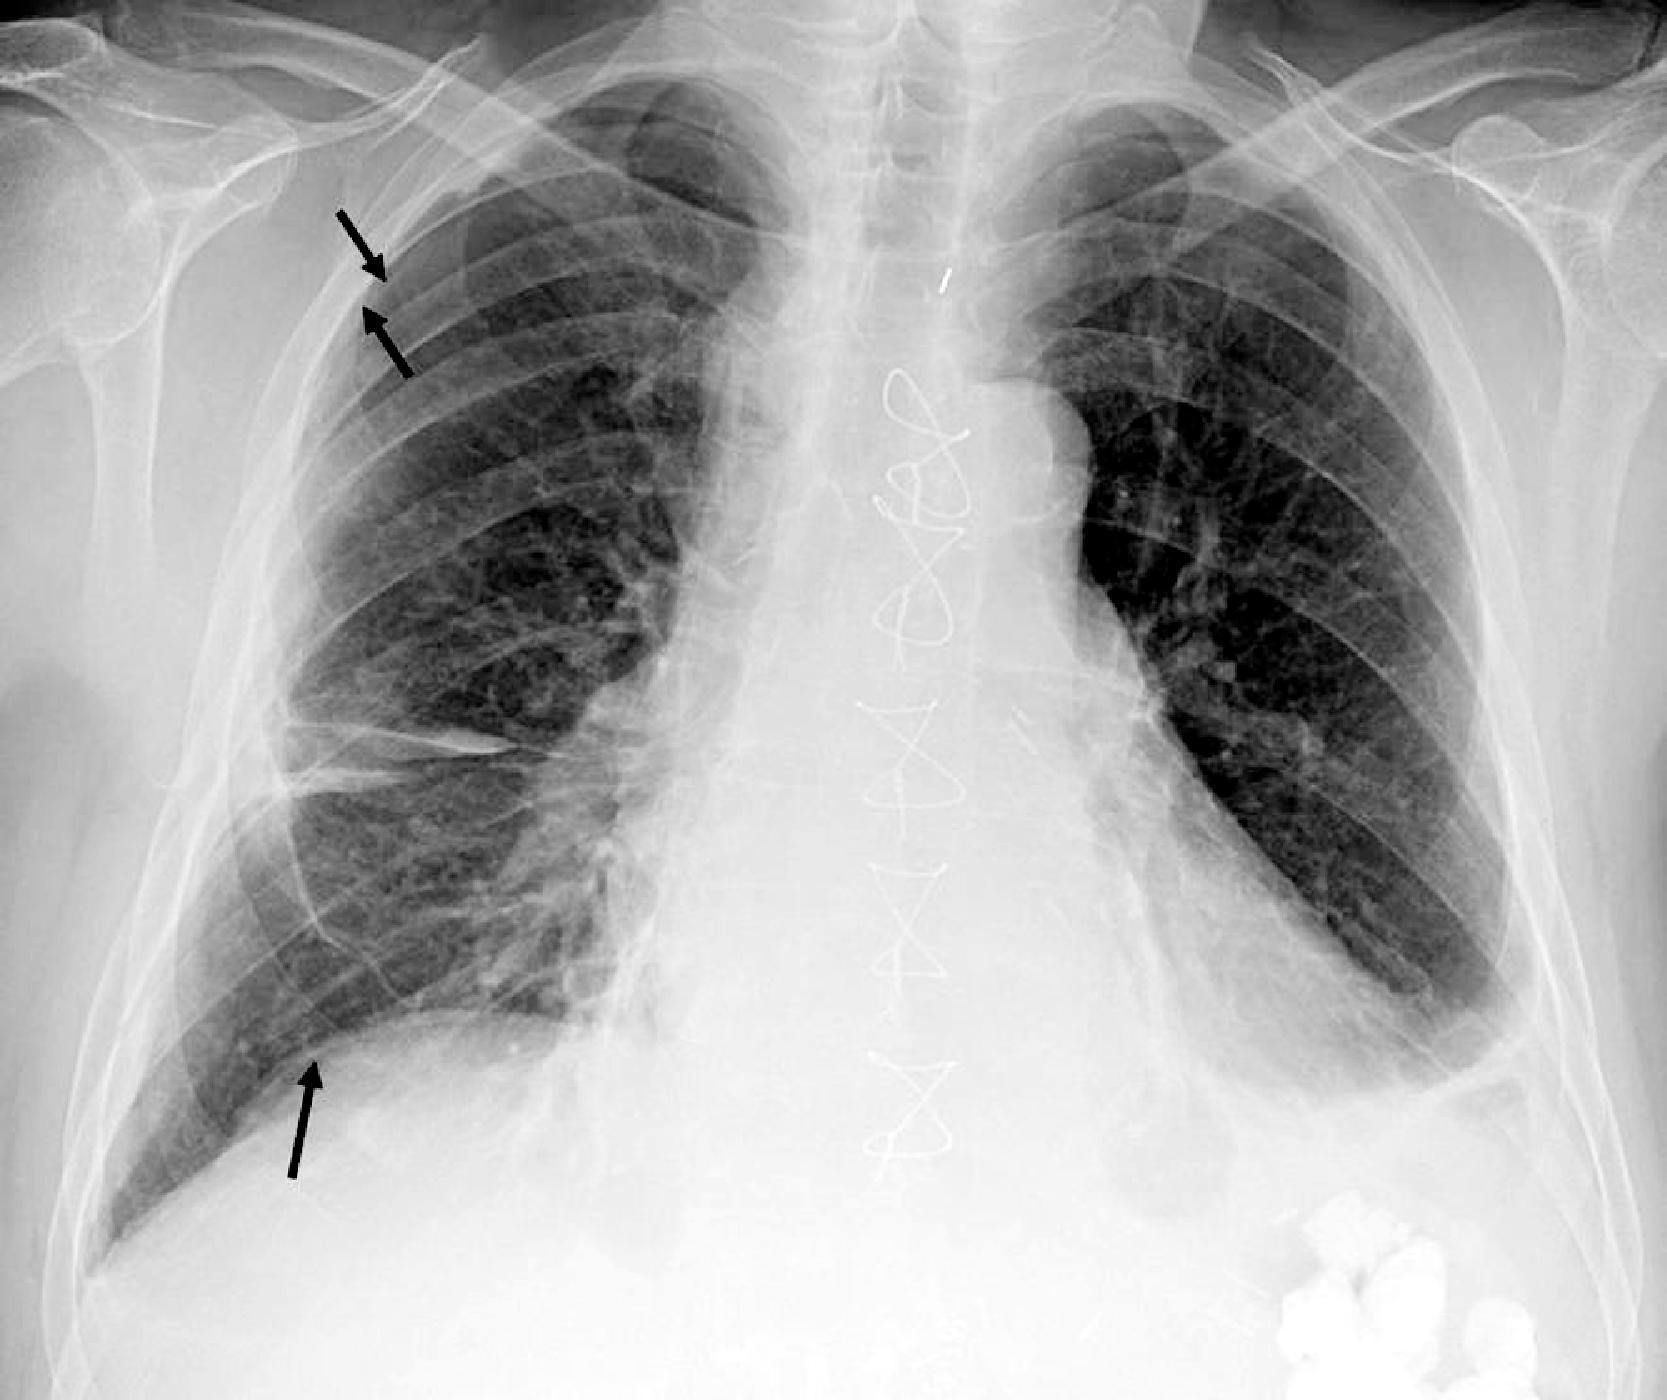 Fig. 2.25, Pneumoperitoneum. Postoperative anteroposterior chest in a patient after thoracotomy. Arrows in right upper chest outline a thin pleural line defining a tiny pneumothorax. Arrow in the right lower chest demarcates the right hemidiaphragm outlined by a small pneumoperitoneum. This patient also has cardiomegaly as well as right midlung and left basilar atelectasis.